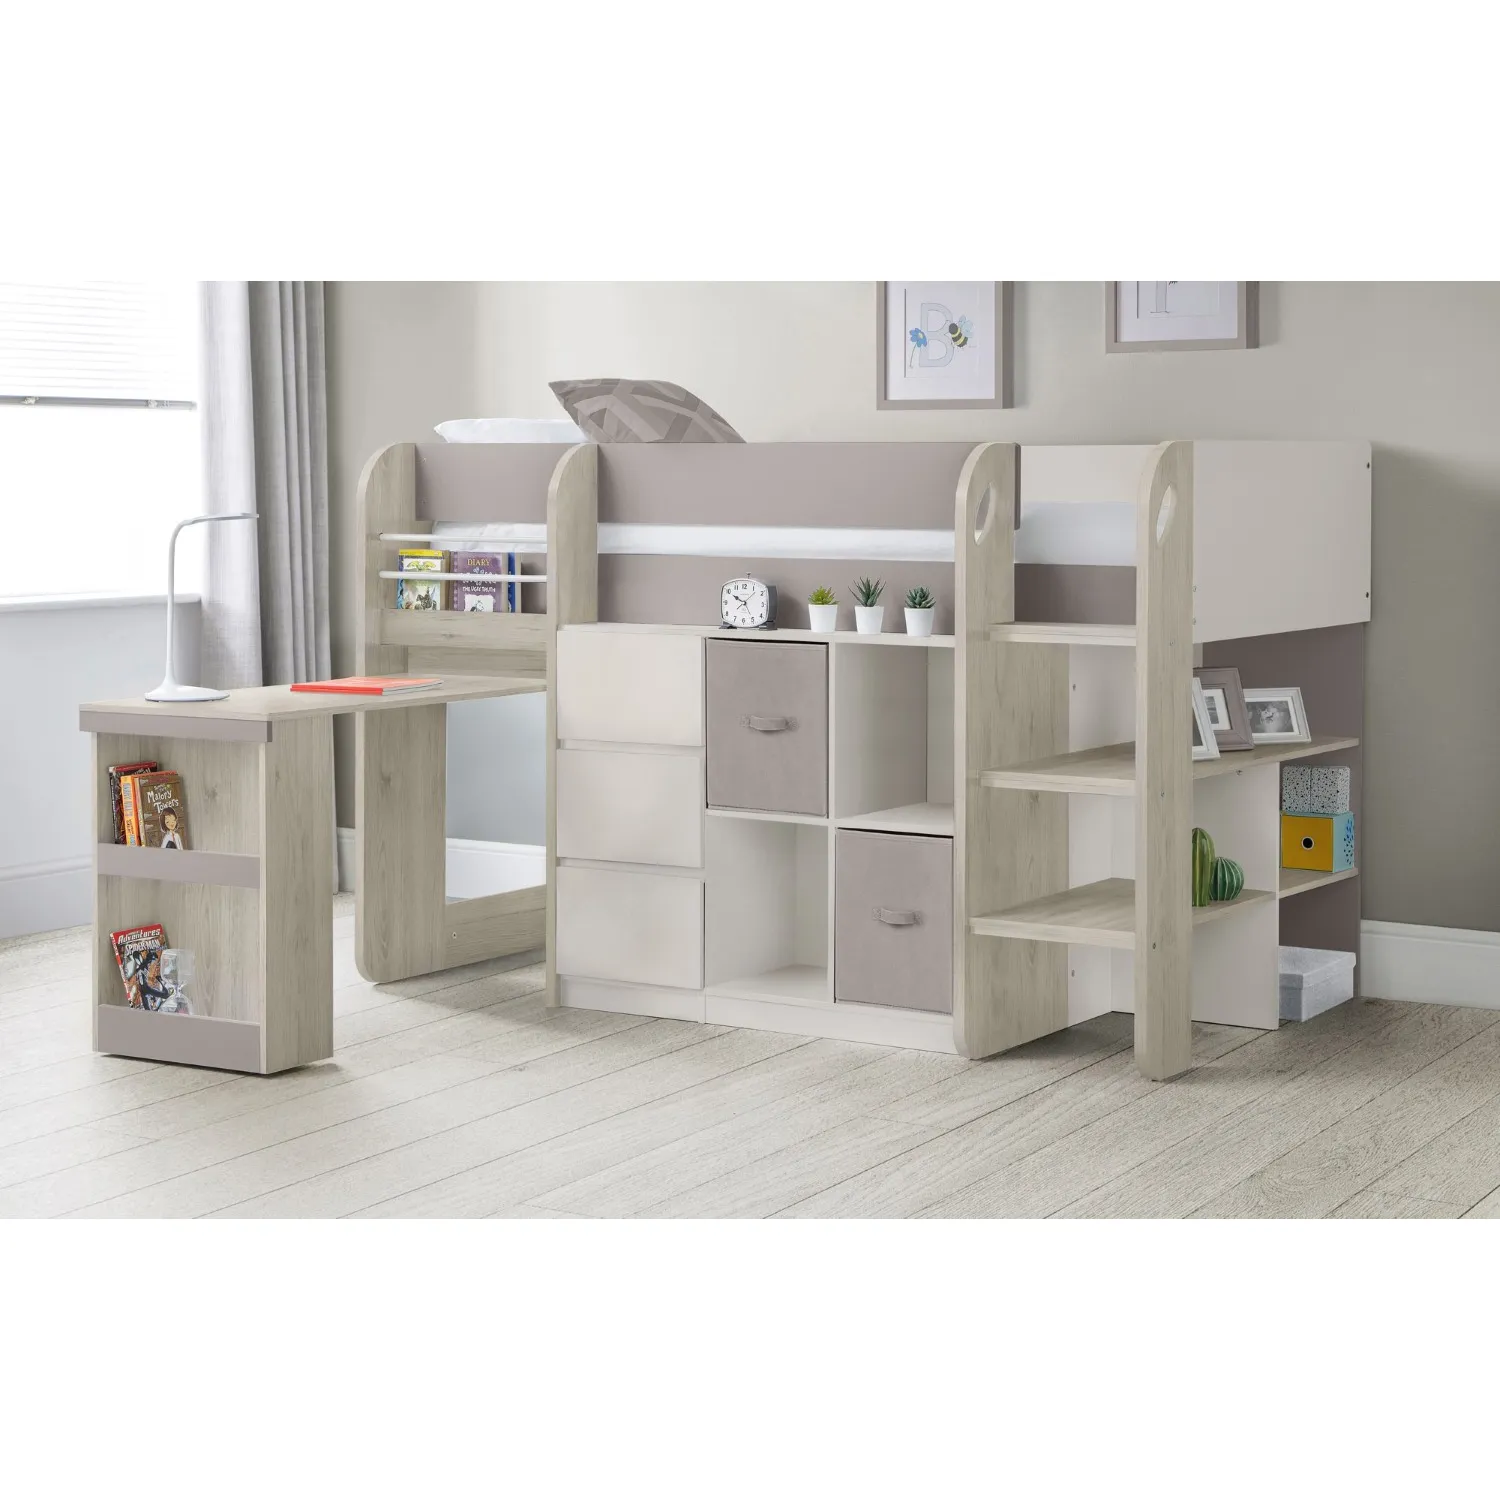 White and Taupe Effect Wooden Kids Mid Sleeper Children